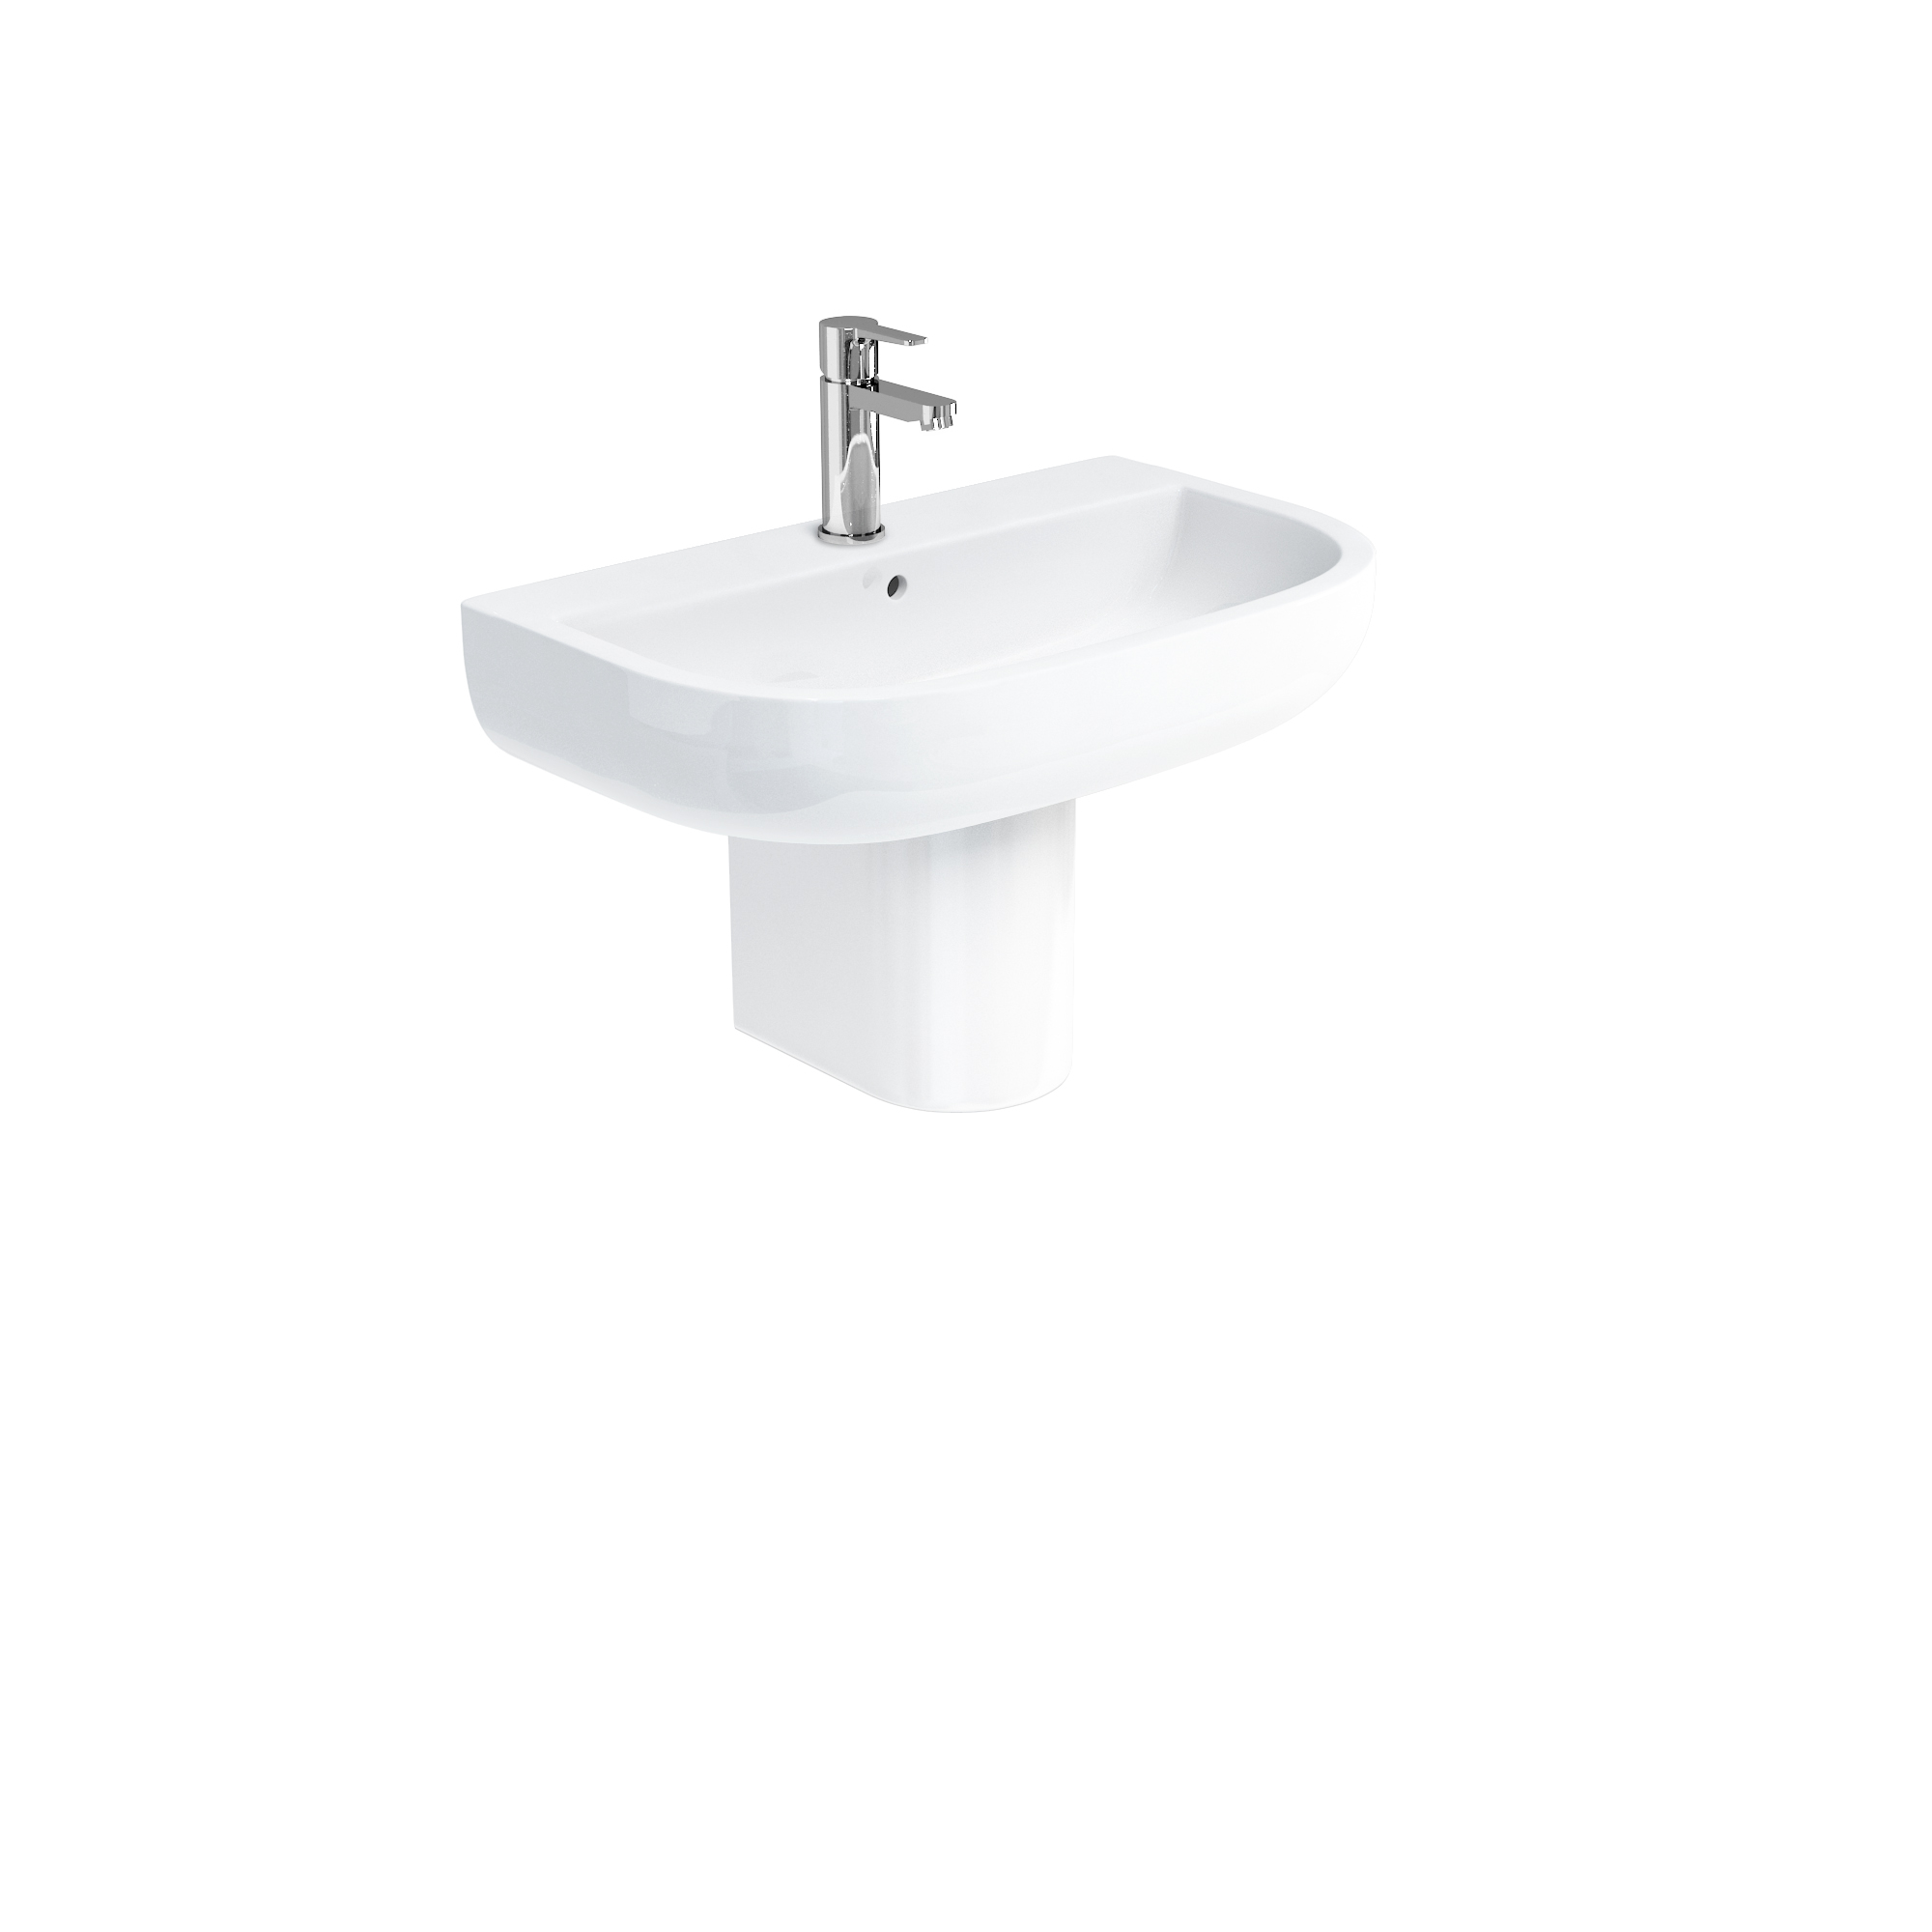 Compact 650 basin and round fronted semi pedestal